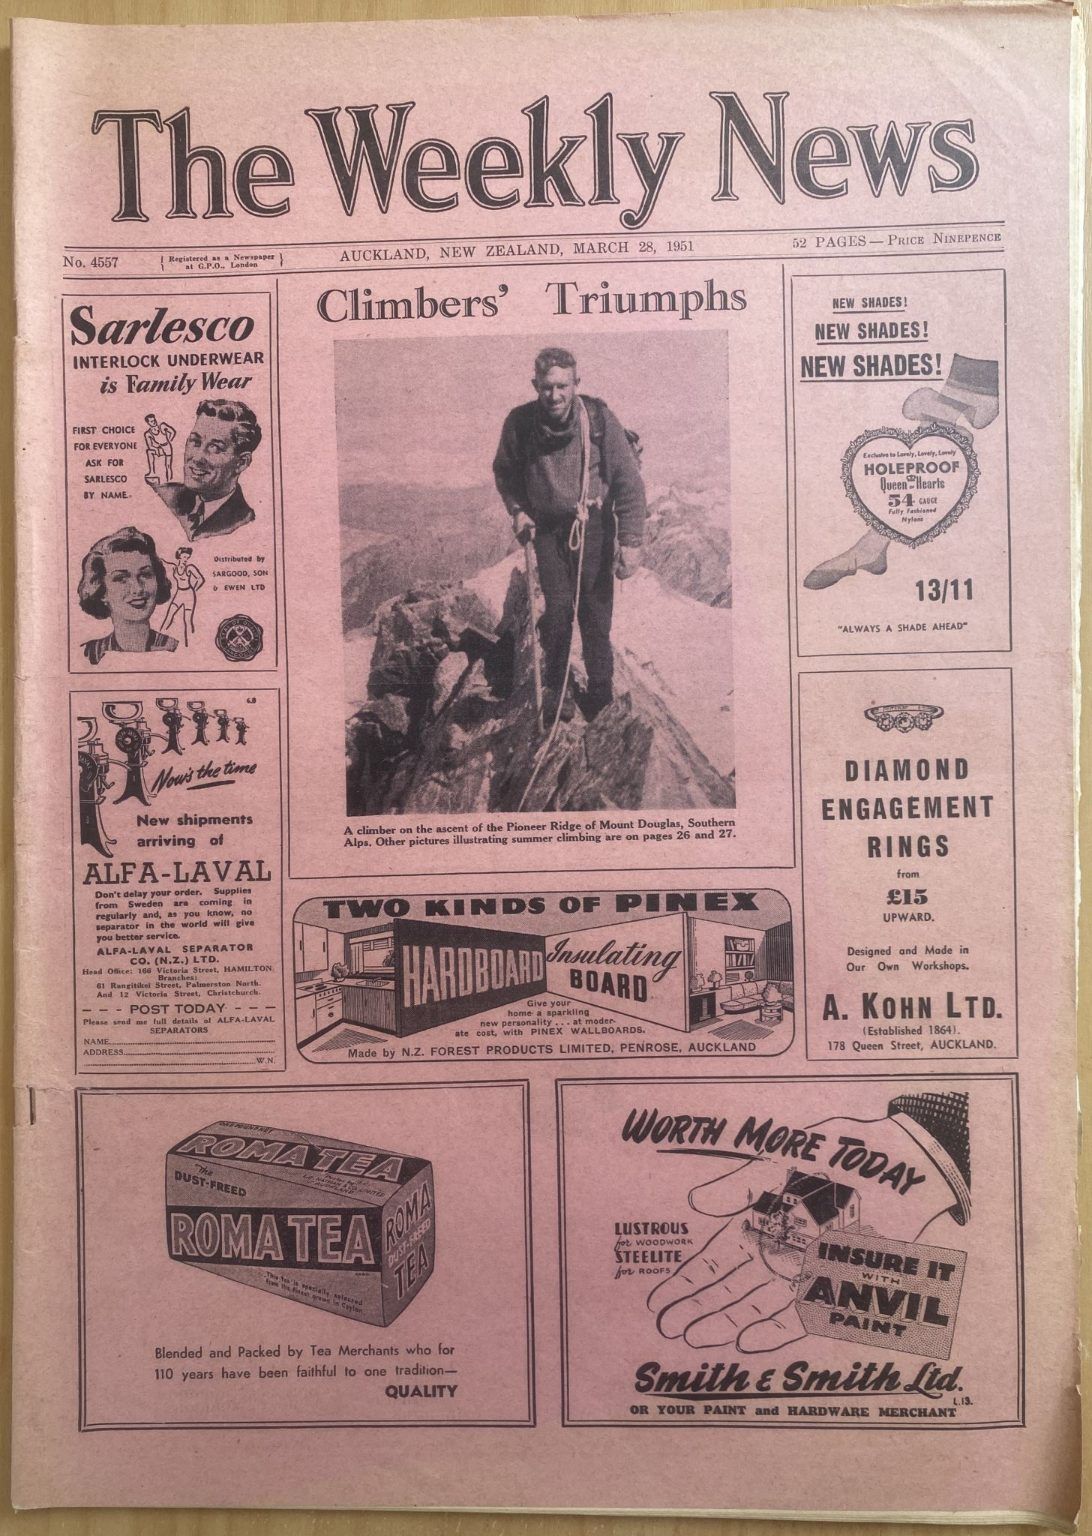 OLD NEWSPAPER: The Weekly News, No. 4557, 28 March 1951